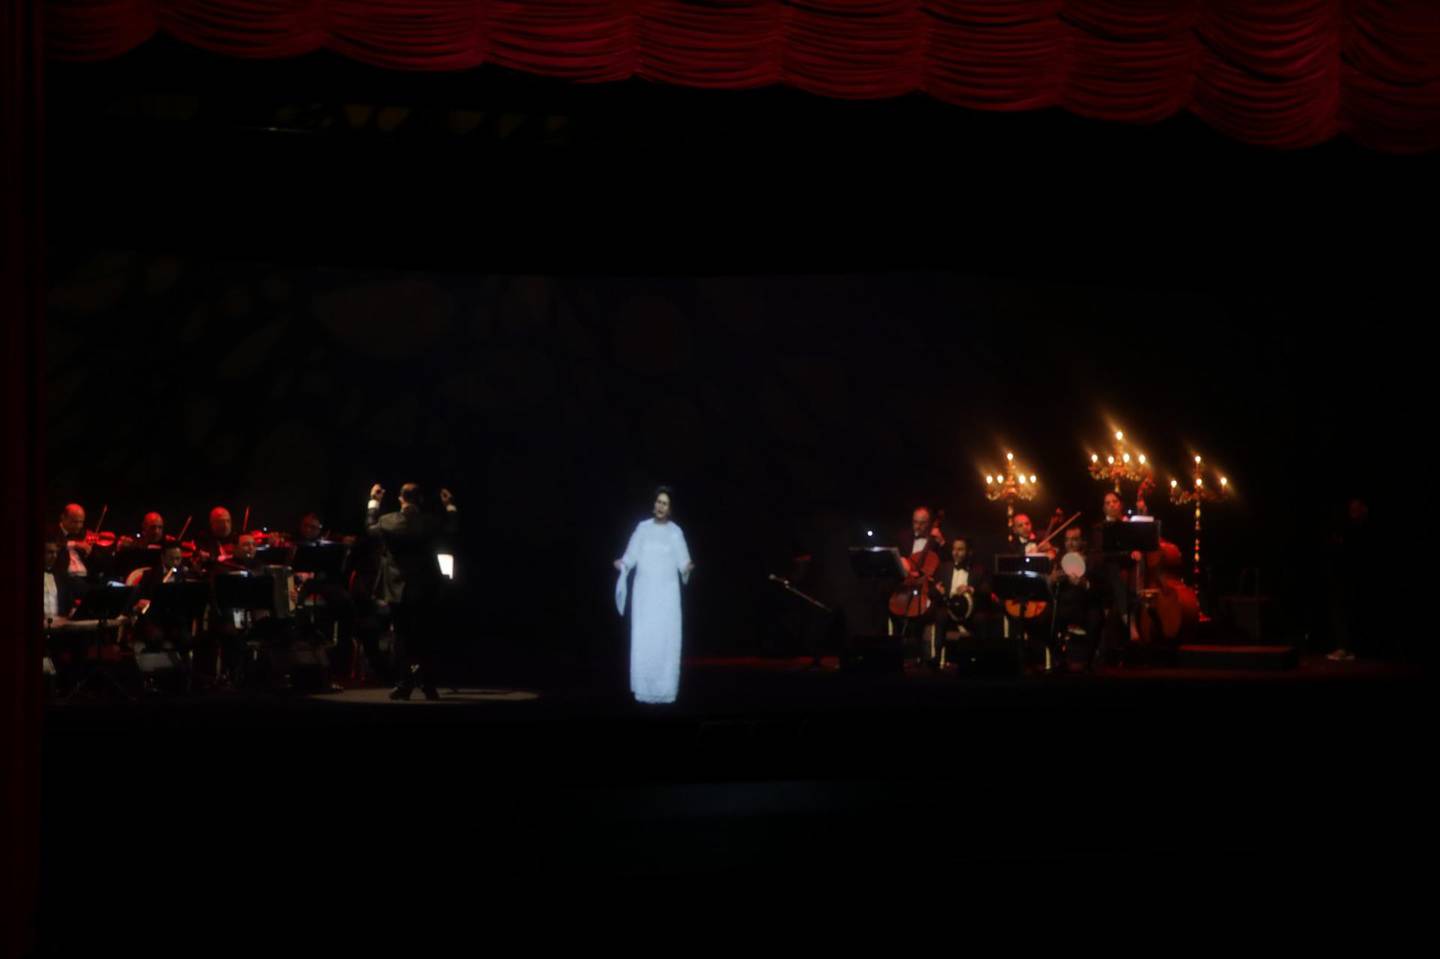 A hologram of the late Egyptian diva Umm Kulthum performed as part of Winter at Tantora festival in Al Ula, Saudi Arabia. Picture by Suhail Rather